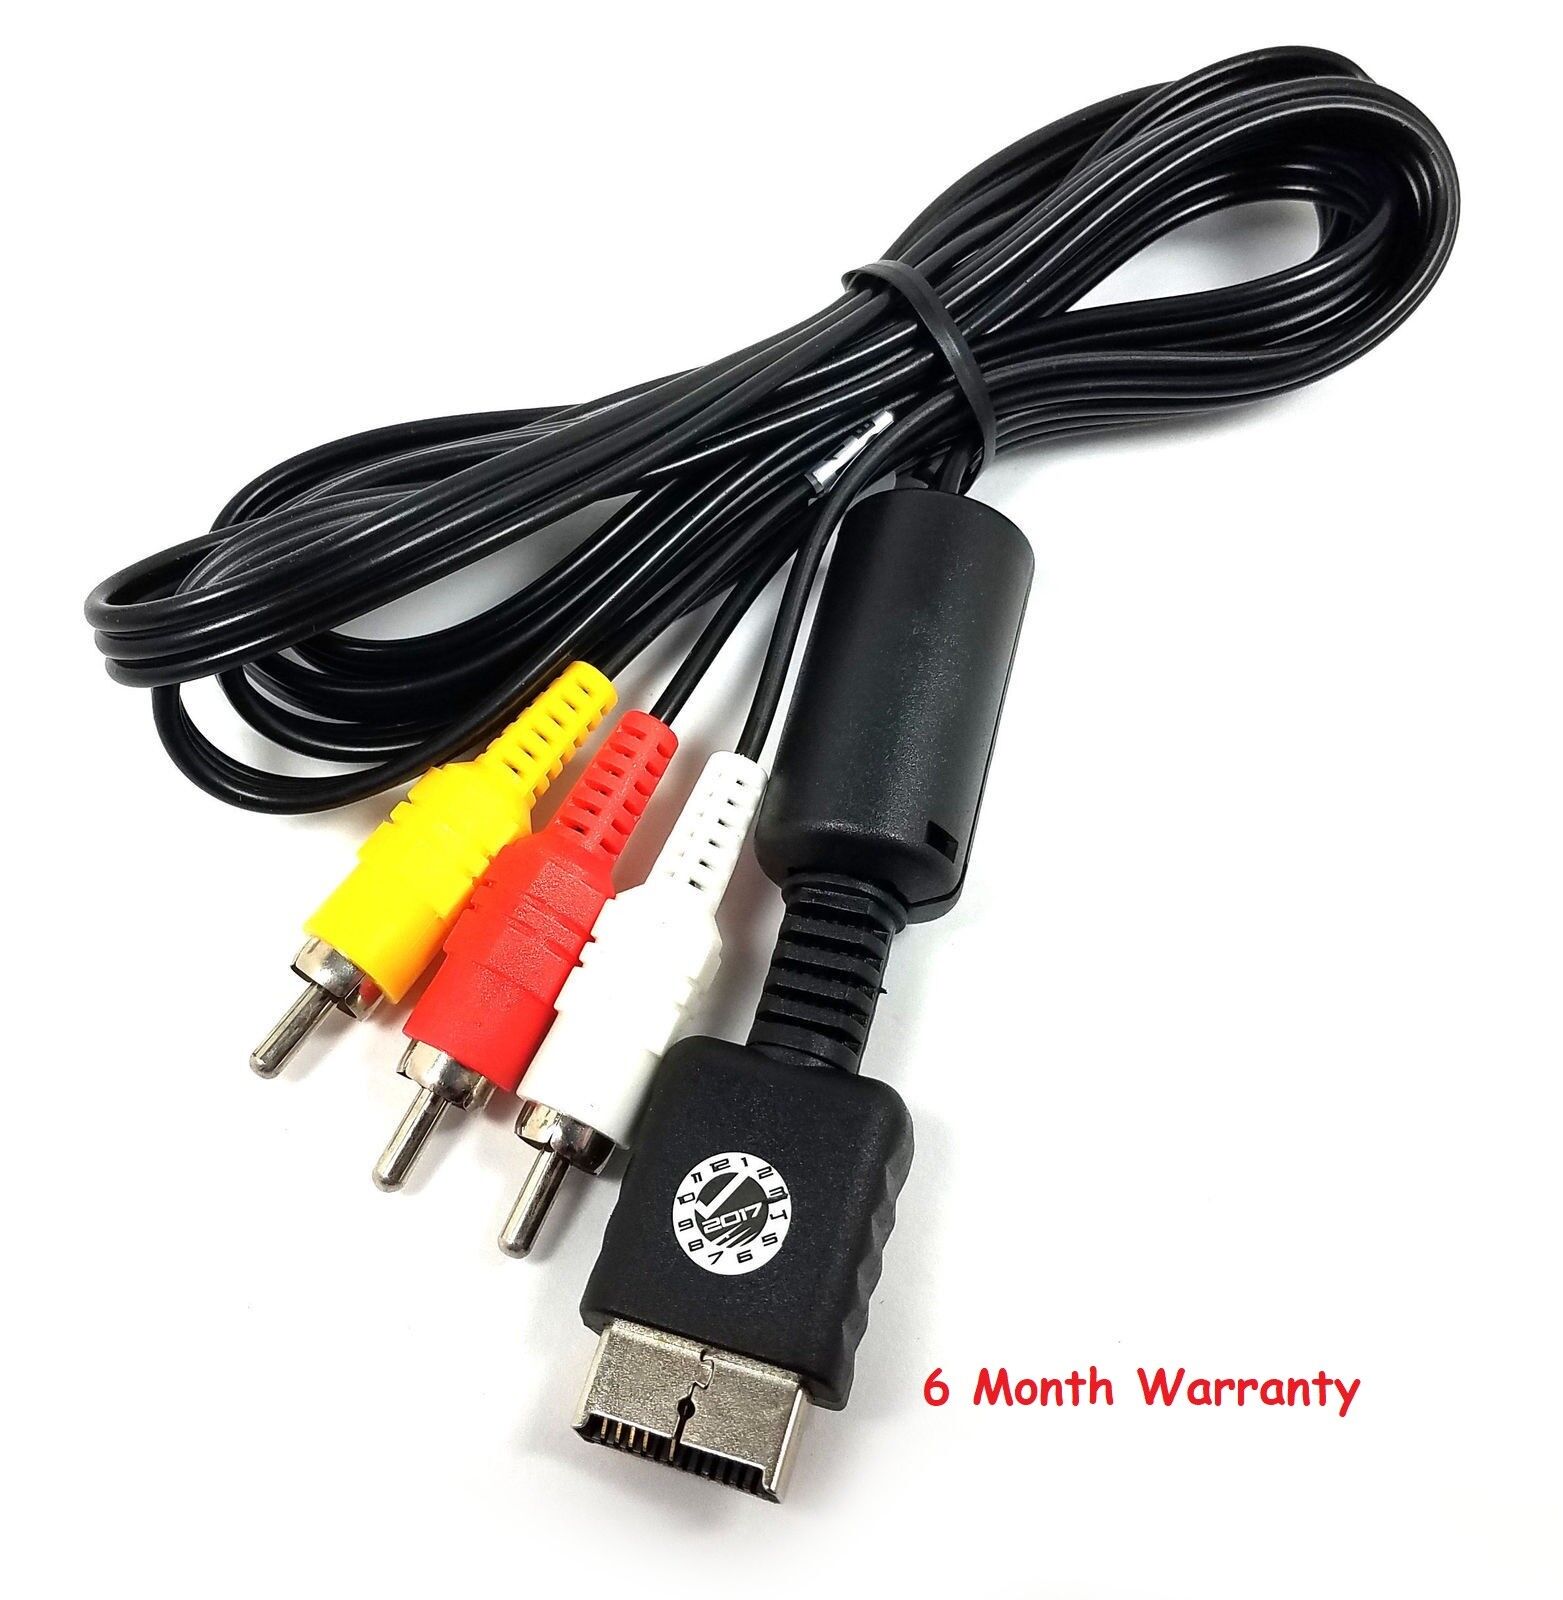 AV Video Audio Cable For Sony Playstation 1,2,3 "6 Month Warranty" KMD KMD-P2-0360